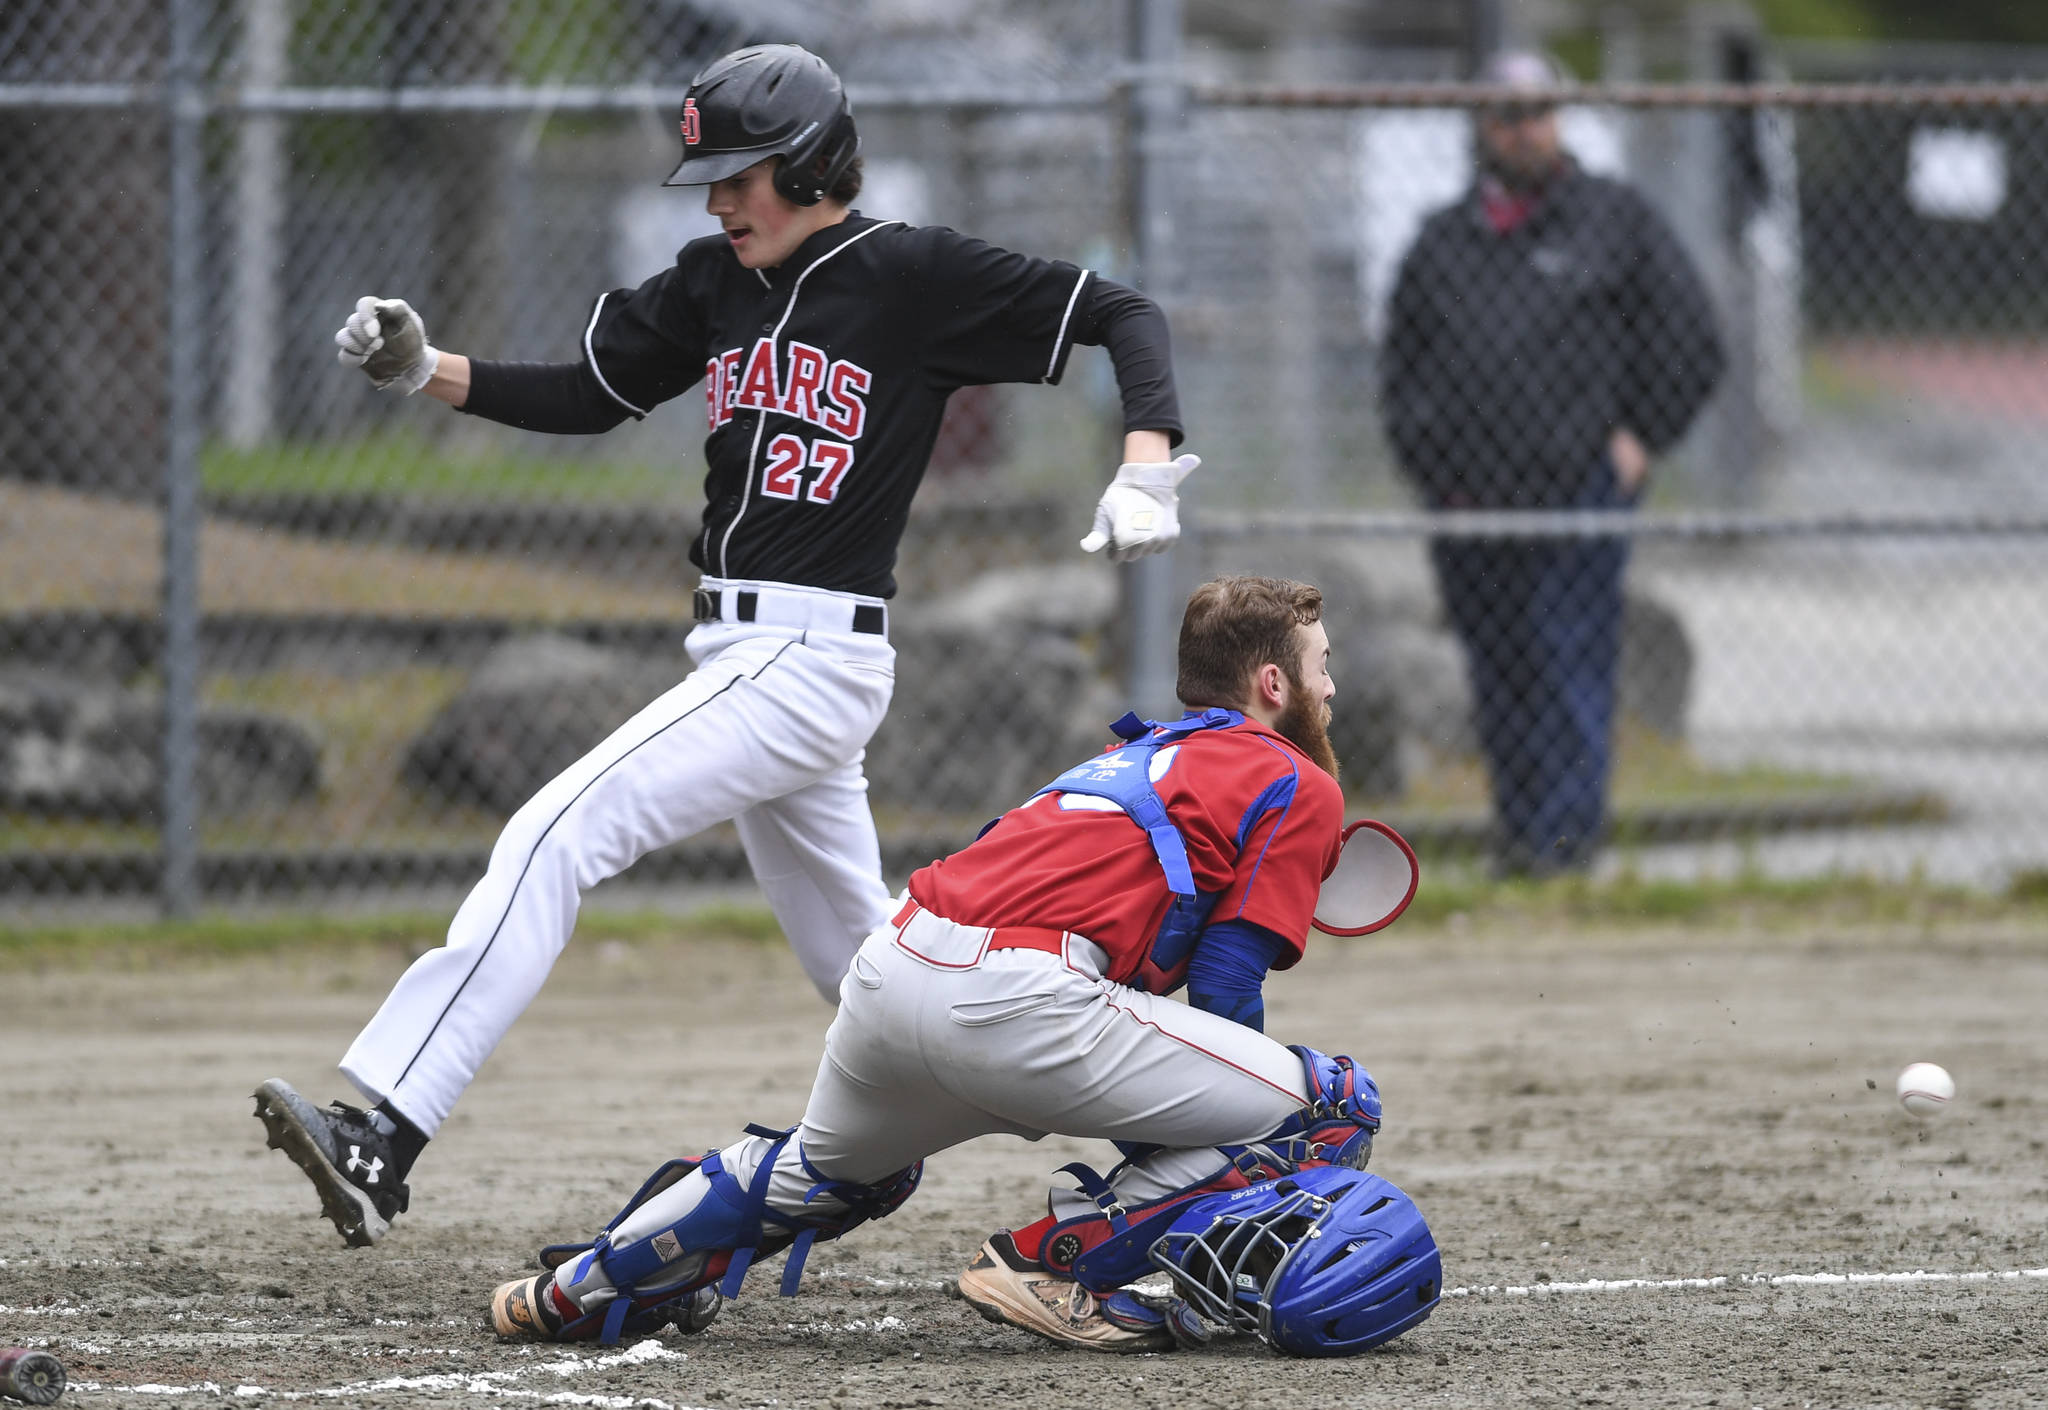 Juneau-Douglas’ scores in front of the throw to Sitka’s catcher Morgan Simic in the fourth inning during the Region V Baseball Championship at Adair-Kennedy Memorial Park on Thursday, May 23, 2019. JDHS won 6-5. (Michael Penn | Juneau Empire)